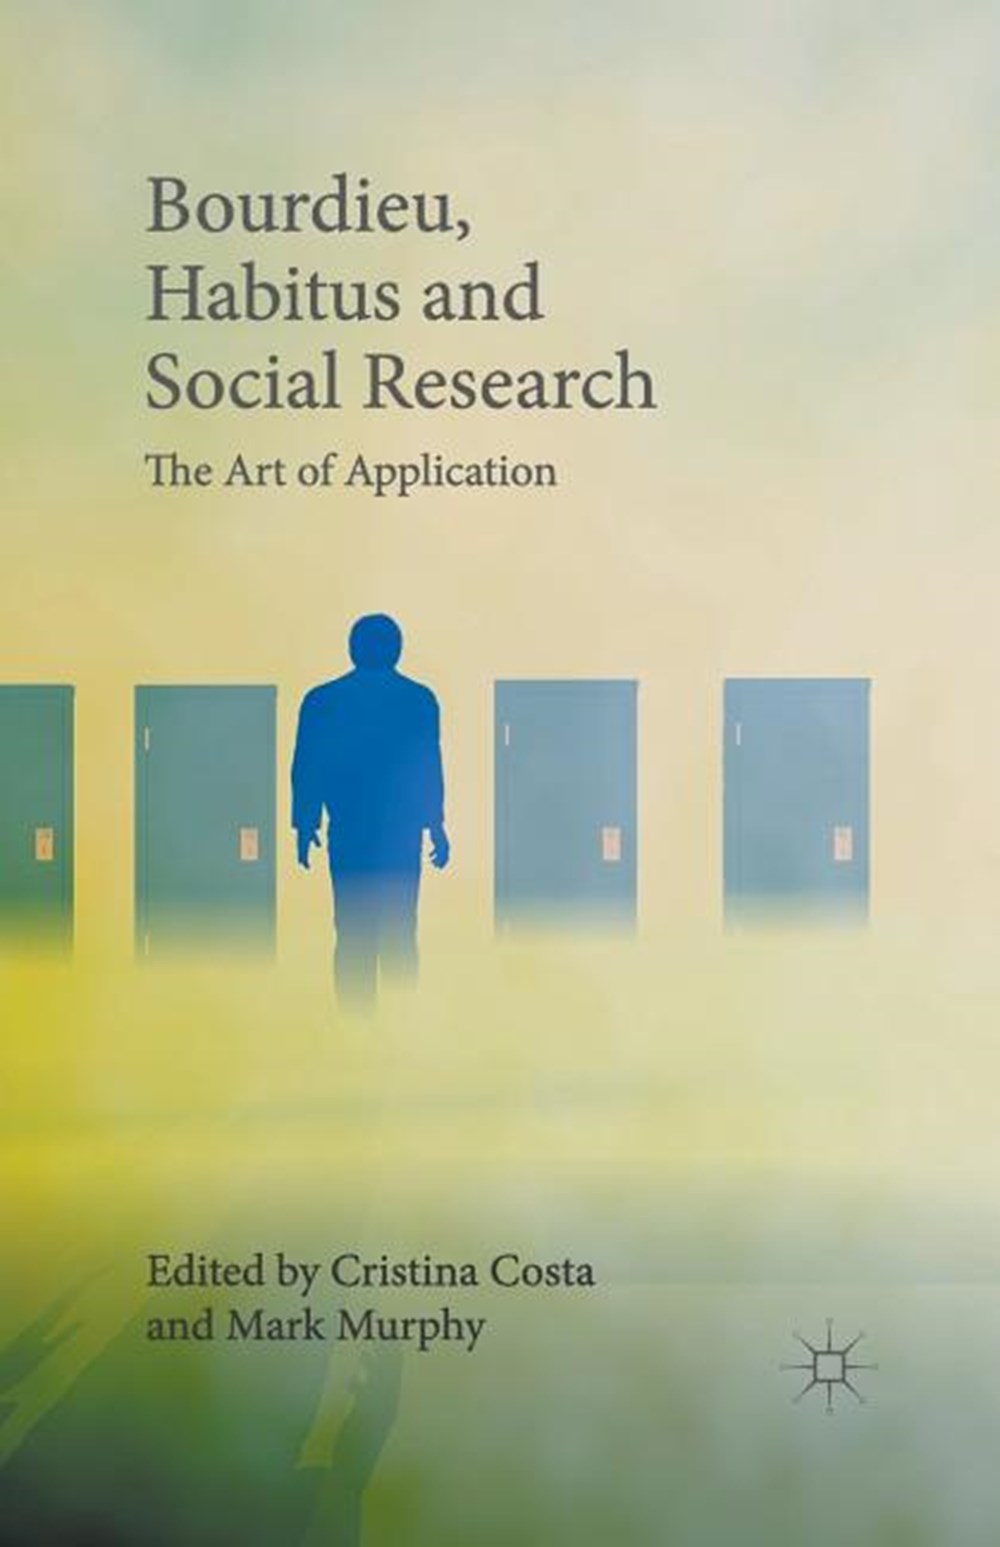 Bourdieu, Habitus and Social Research: The Art of Application (2015)